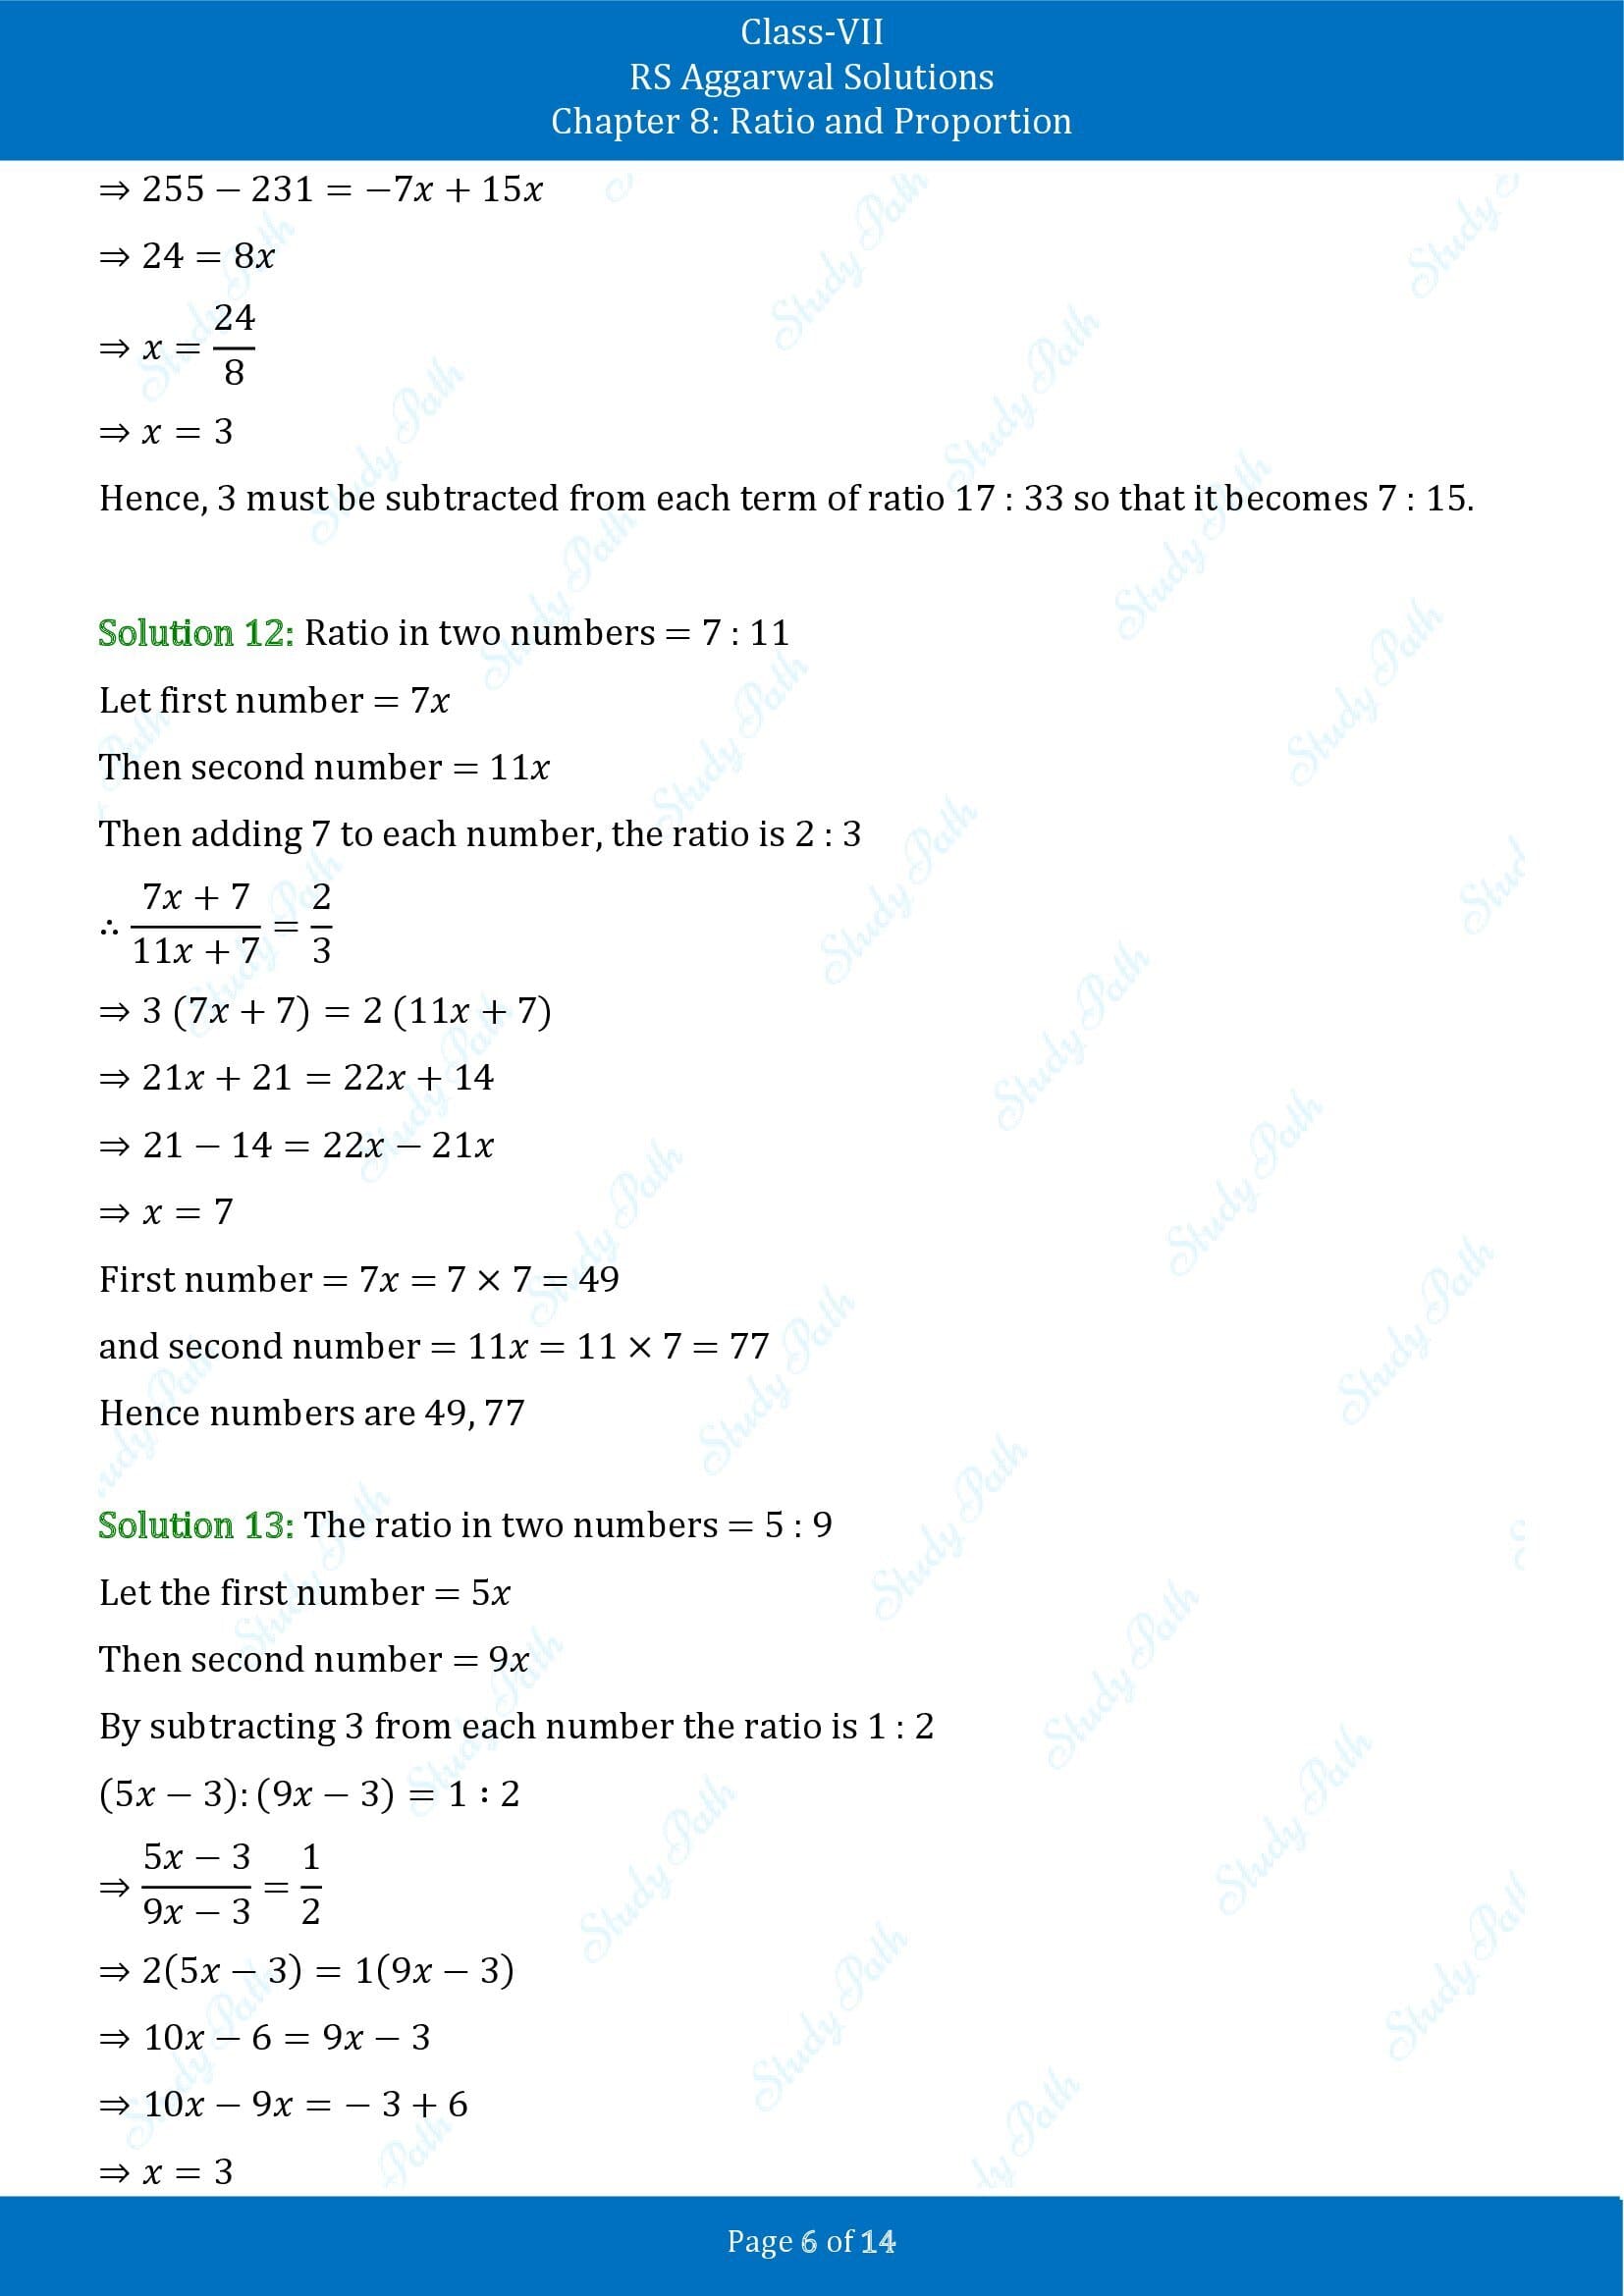 RS Aggarwal Solutions Class 7 Chapter 8 Ratio and Proportion Exercise 8A 00006